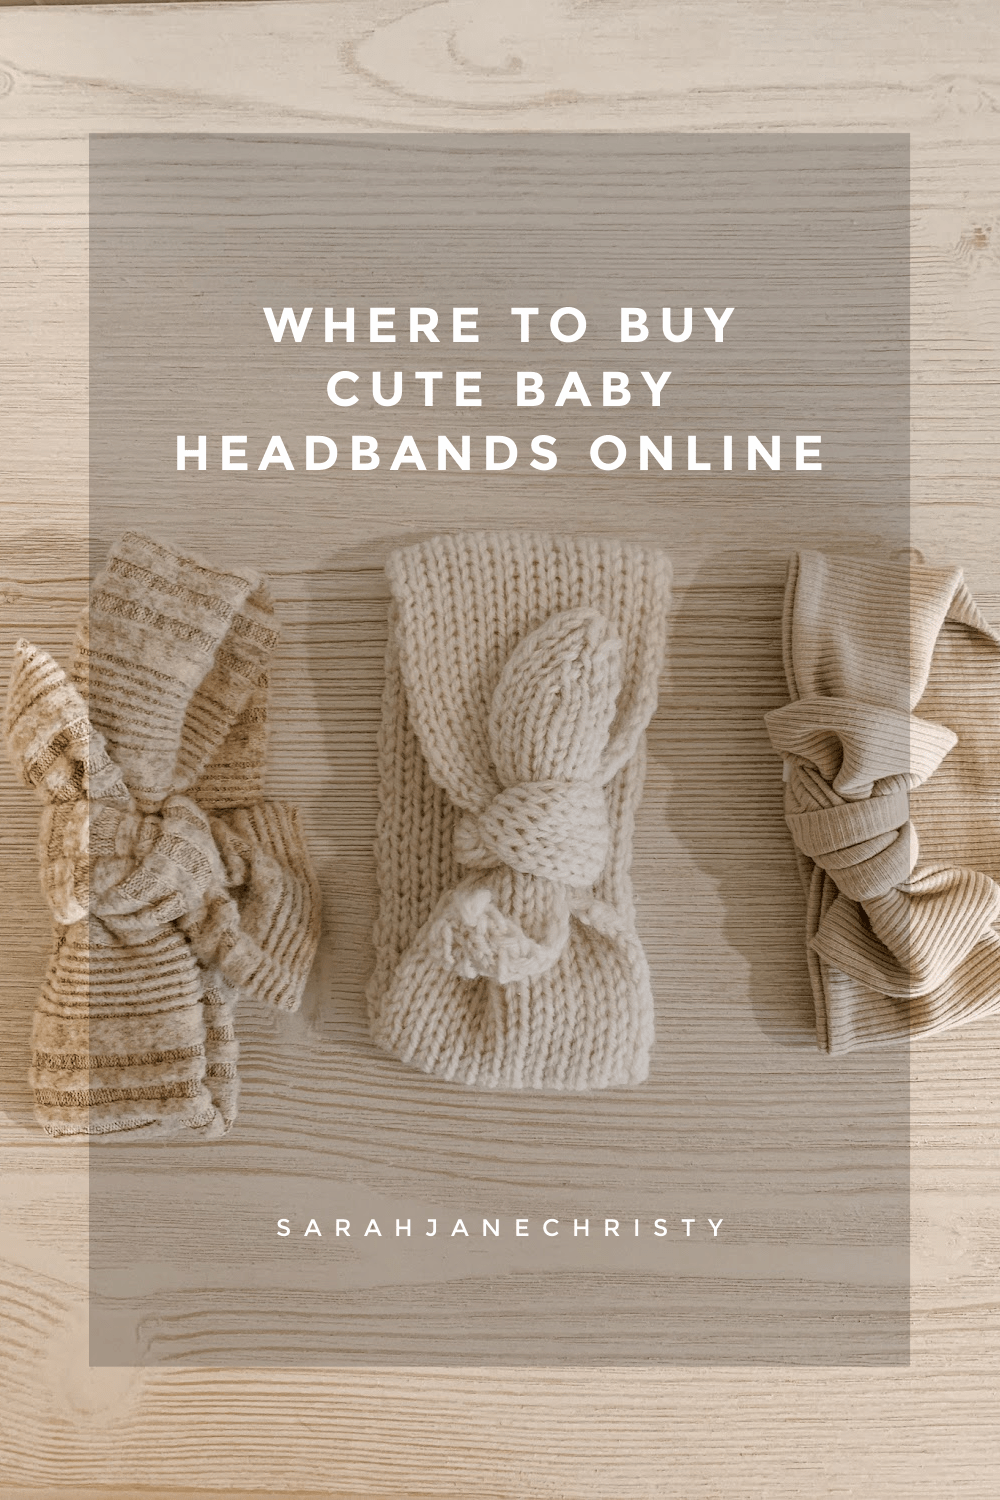 Where to Buy Cute Baby Headbands Online